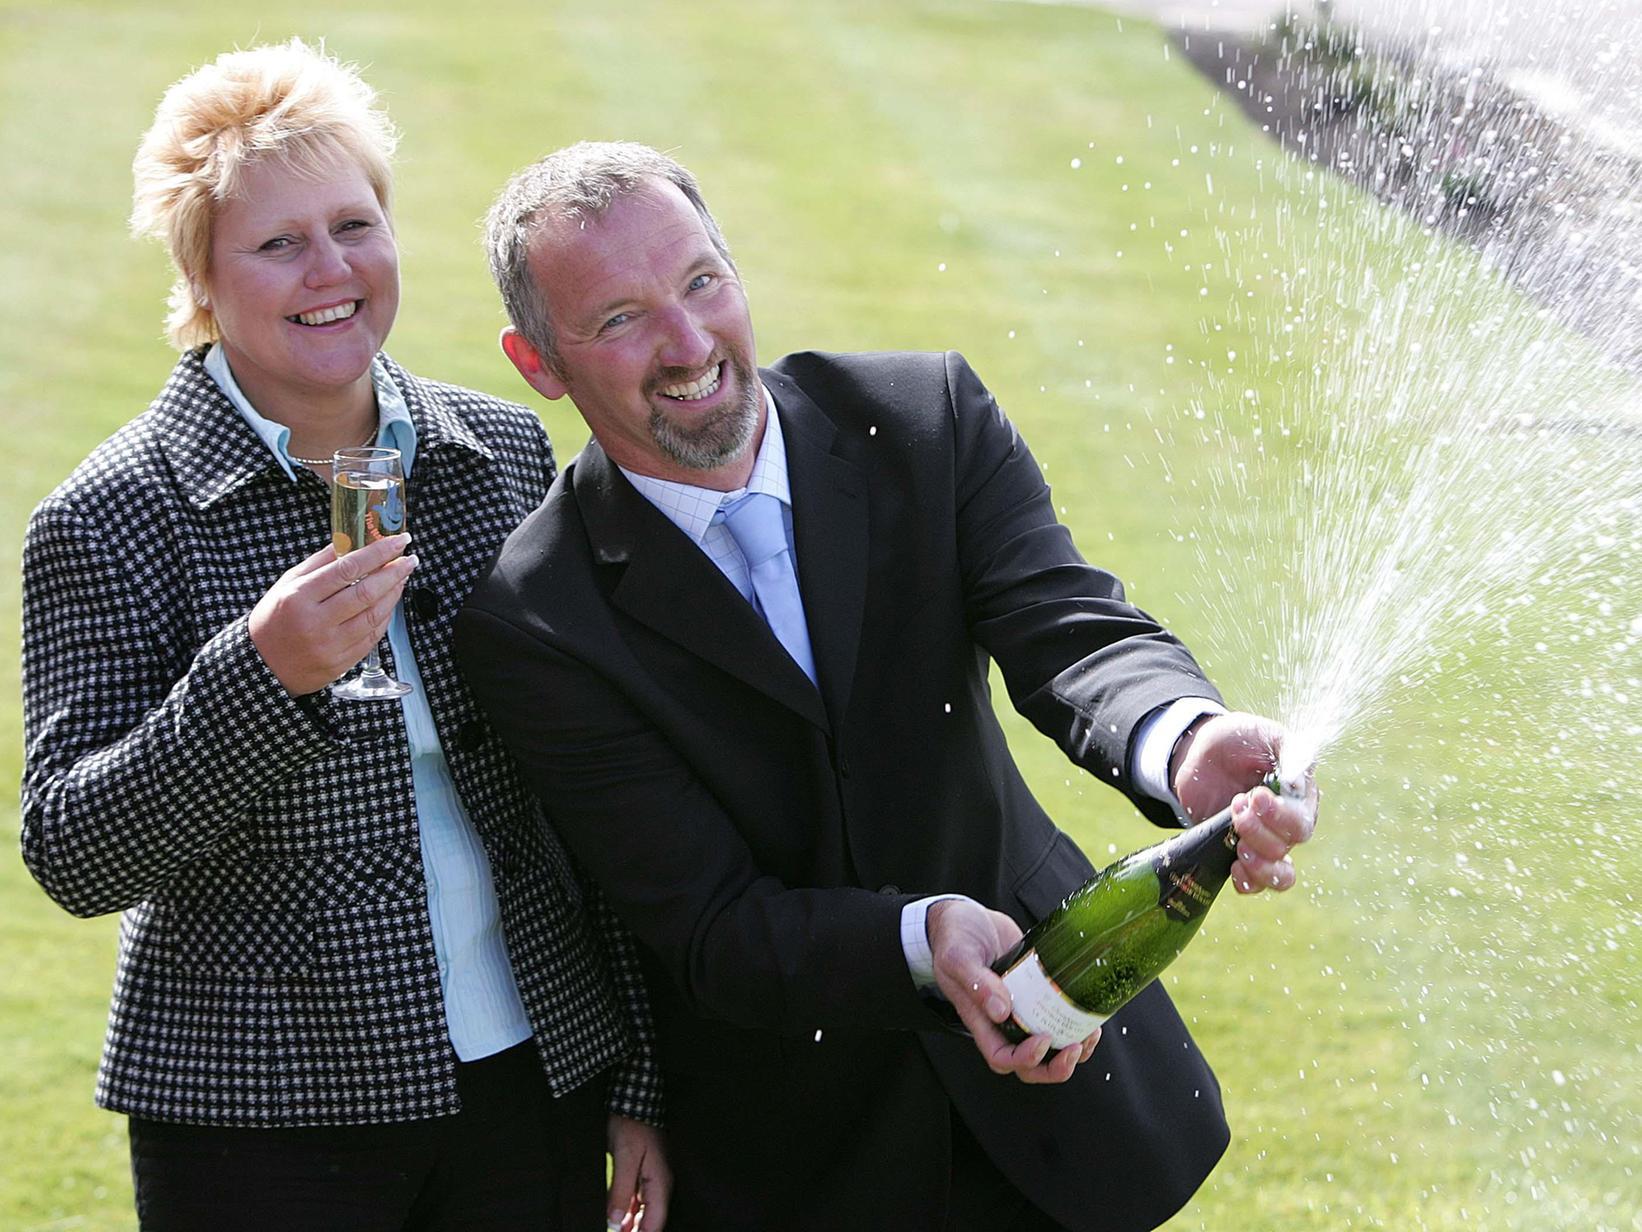 In August 2005, Preesall couple Colin Bradley and wife Pauline scooped 1.4 million on the lottery. Mrs Bradley, a nursing sister at a GP practice, had spilt a Chinese meal over their regular lottery ticket at home.